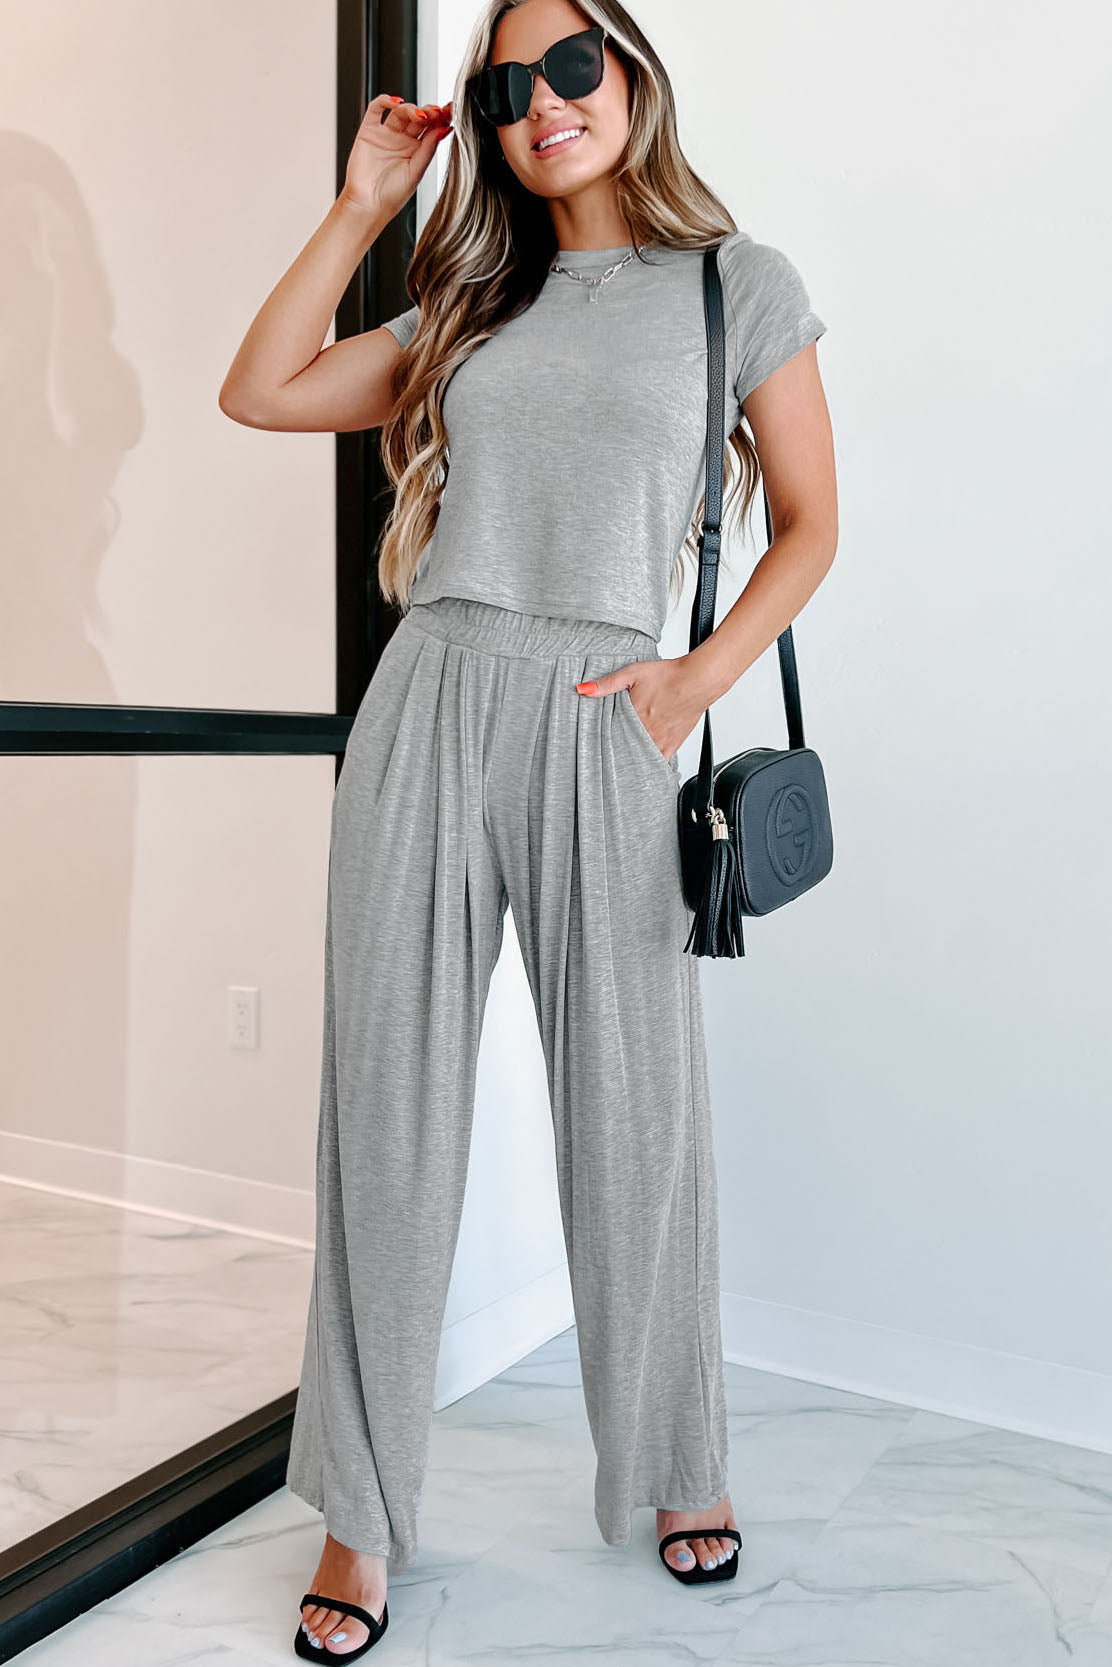 Printed Two Piece Palazzo Pants Set With Wide Leg And Lapel Shirt Elegant  And Casual Loose Fit From Hehuixiang, $25.71 | DHgate.Com